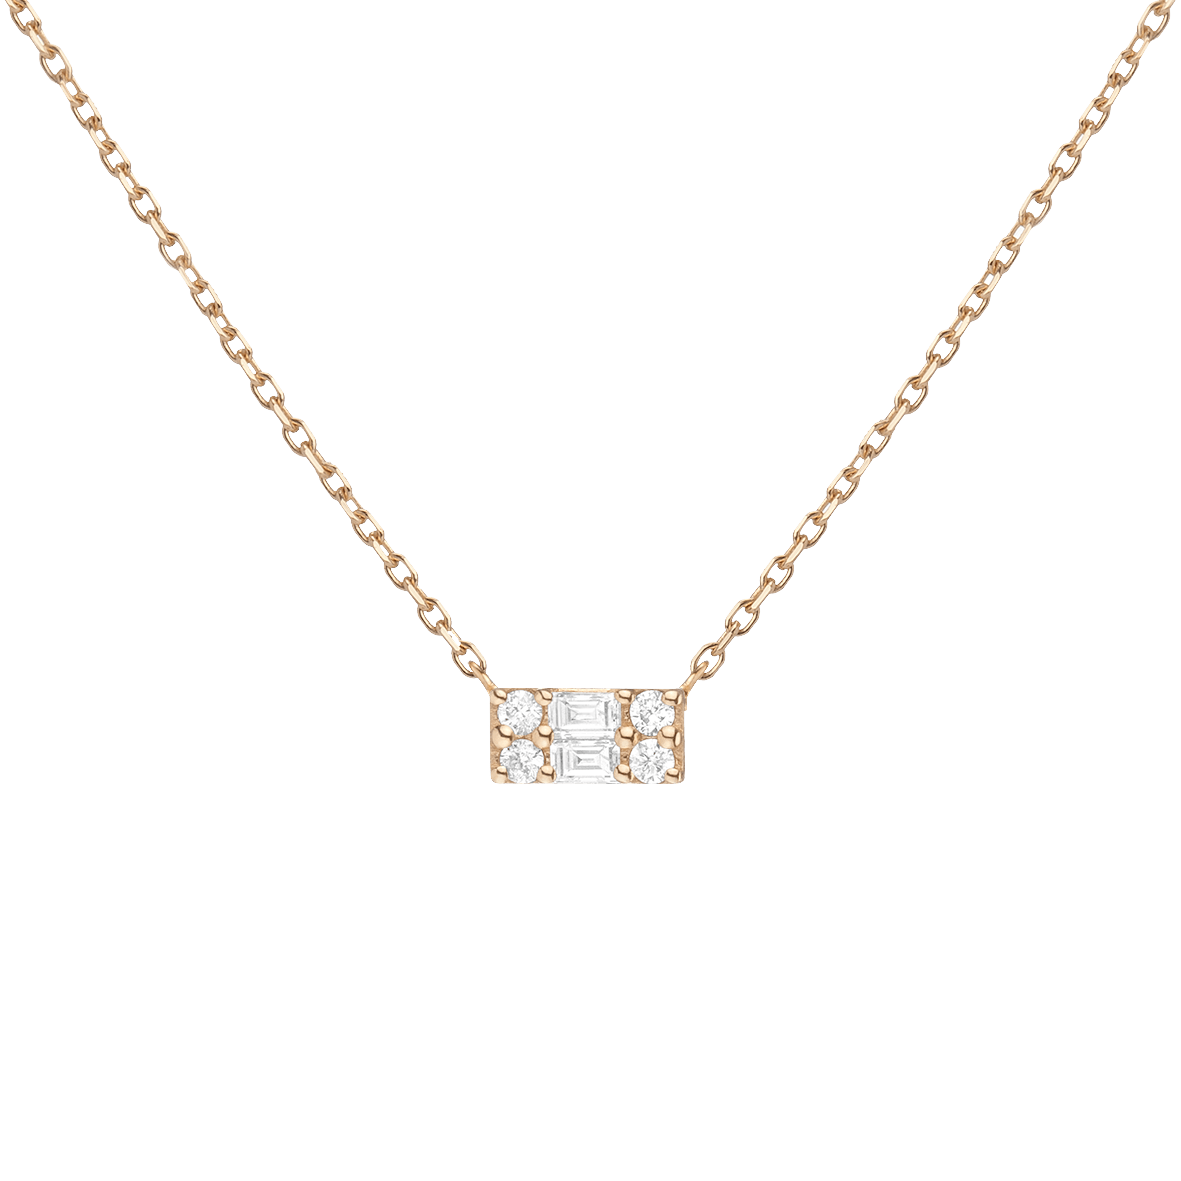 Aurate New York Baguette Diamond Illusion Necklace, 18K Rose Gold